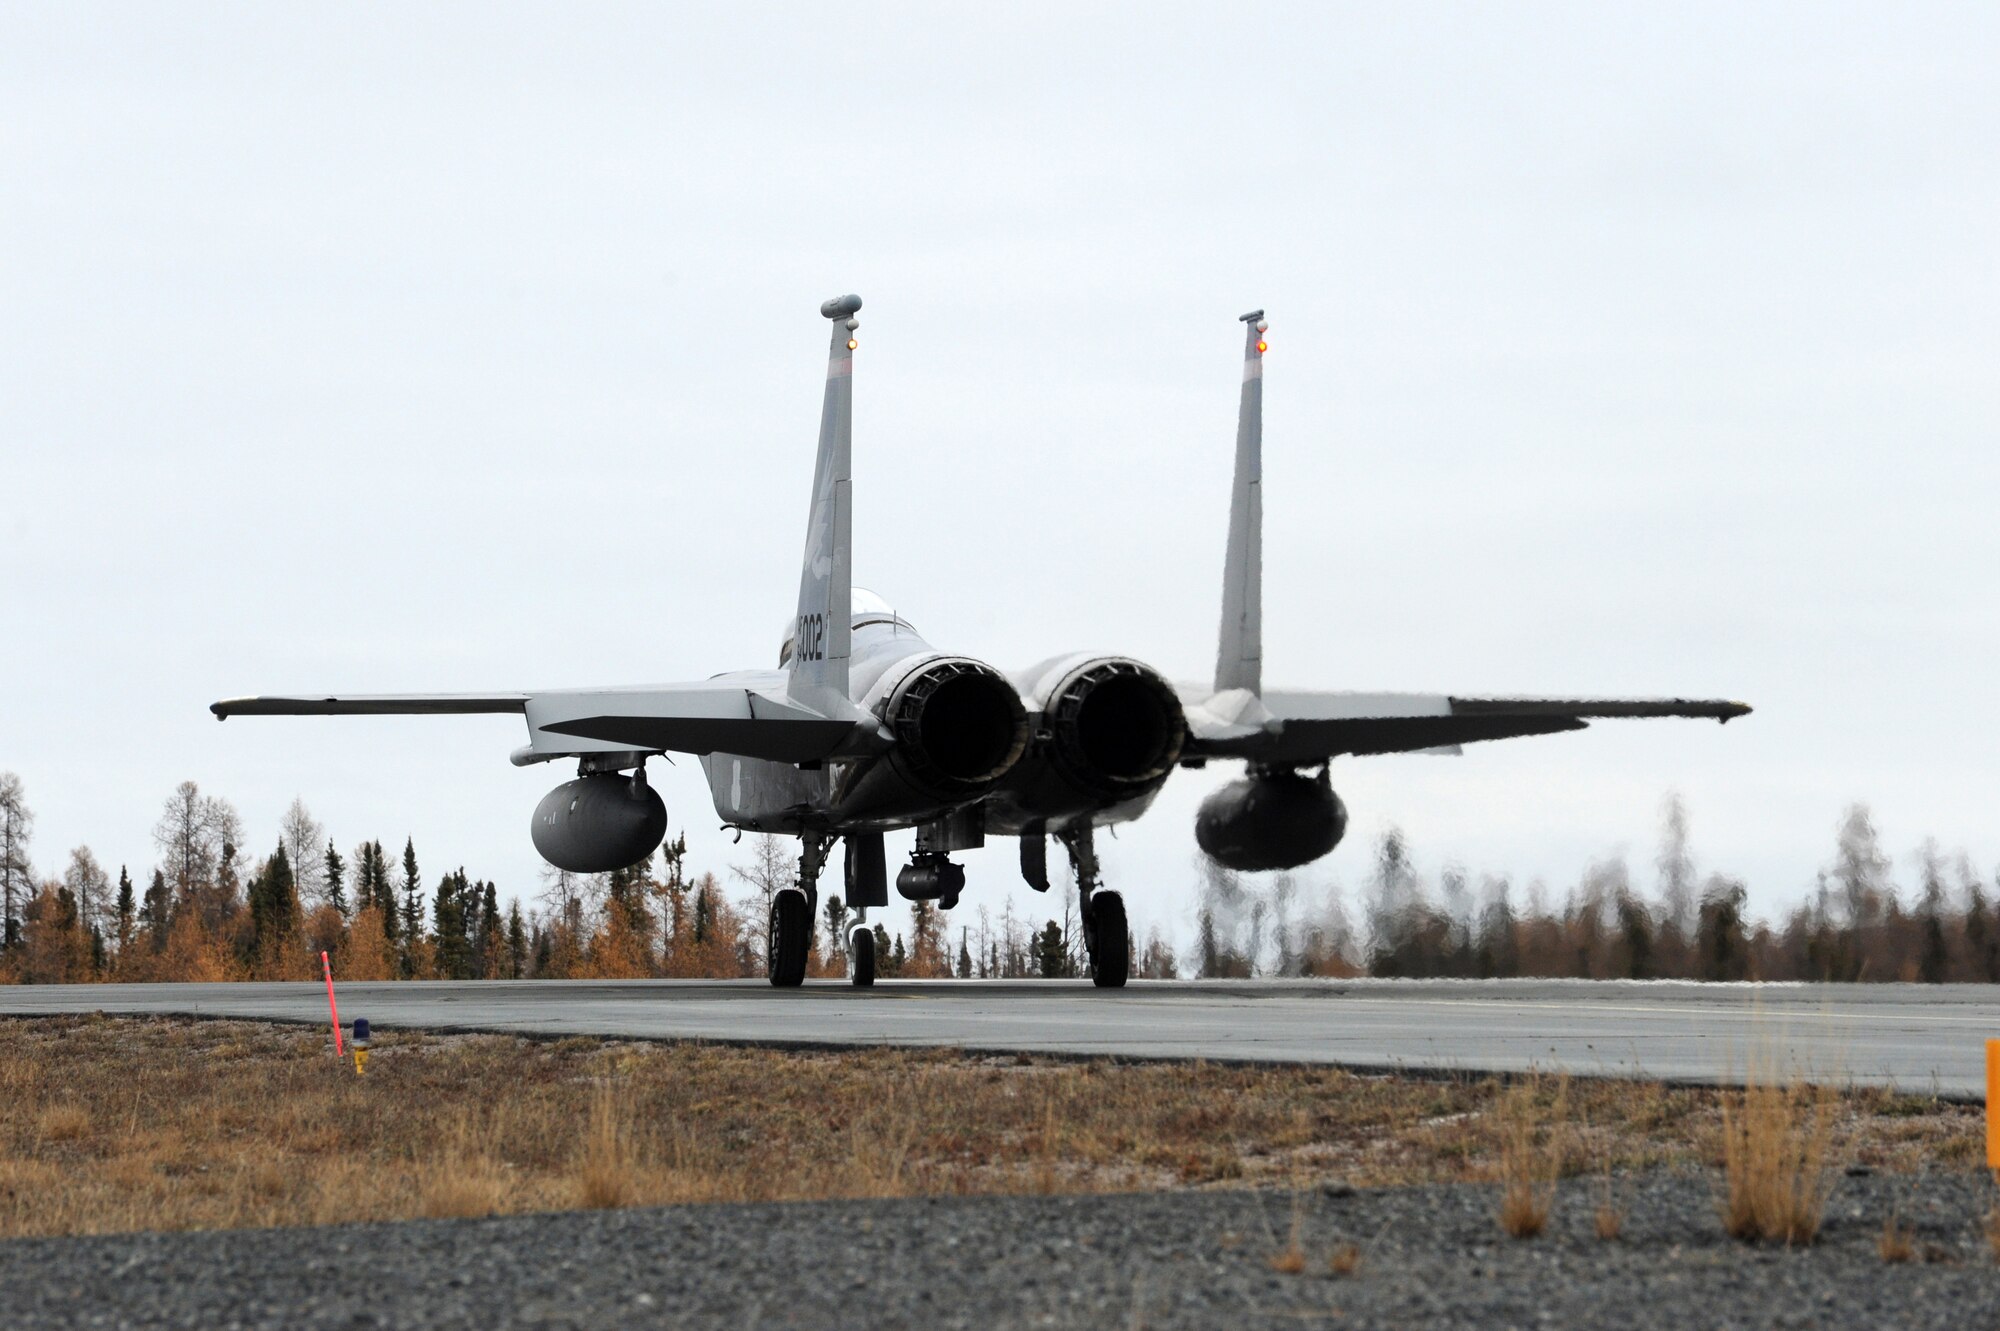 F-15 Eagles assigned to the 142nd Fighter Wing taxi for the trip home following Exercise Vigilant Shield 2017, Yellowknife, Northwest Territories, Oct. 21, 2016. During this exercise, forces supporting North American Aerospace Defense Command (NORAD) will deploy and conduct air sovereignty operations in the far north and the high Arctic demonstrating the ability to detect, identify and meet possible threats in some of the most remote regions in the world.  (U.S. Air National Guard photo by Senior Master Sgt. Shelly Davison, 142nd Fighter Wing Public Affairs). 